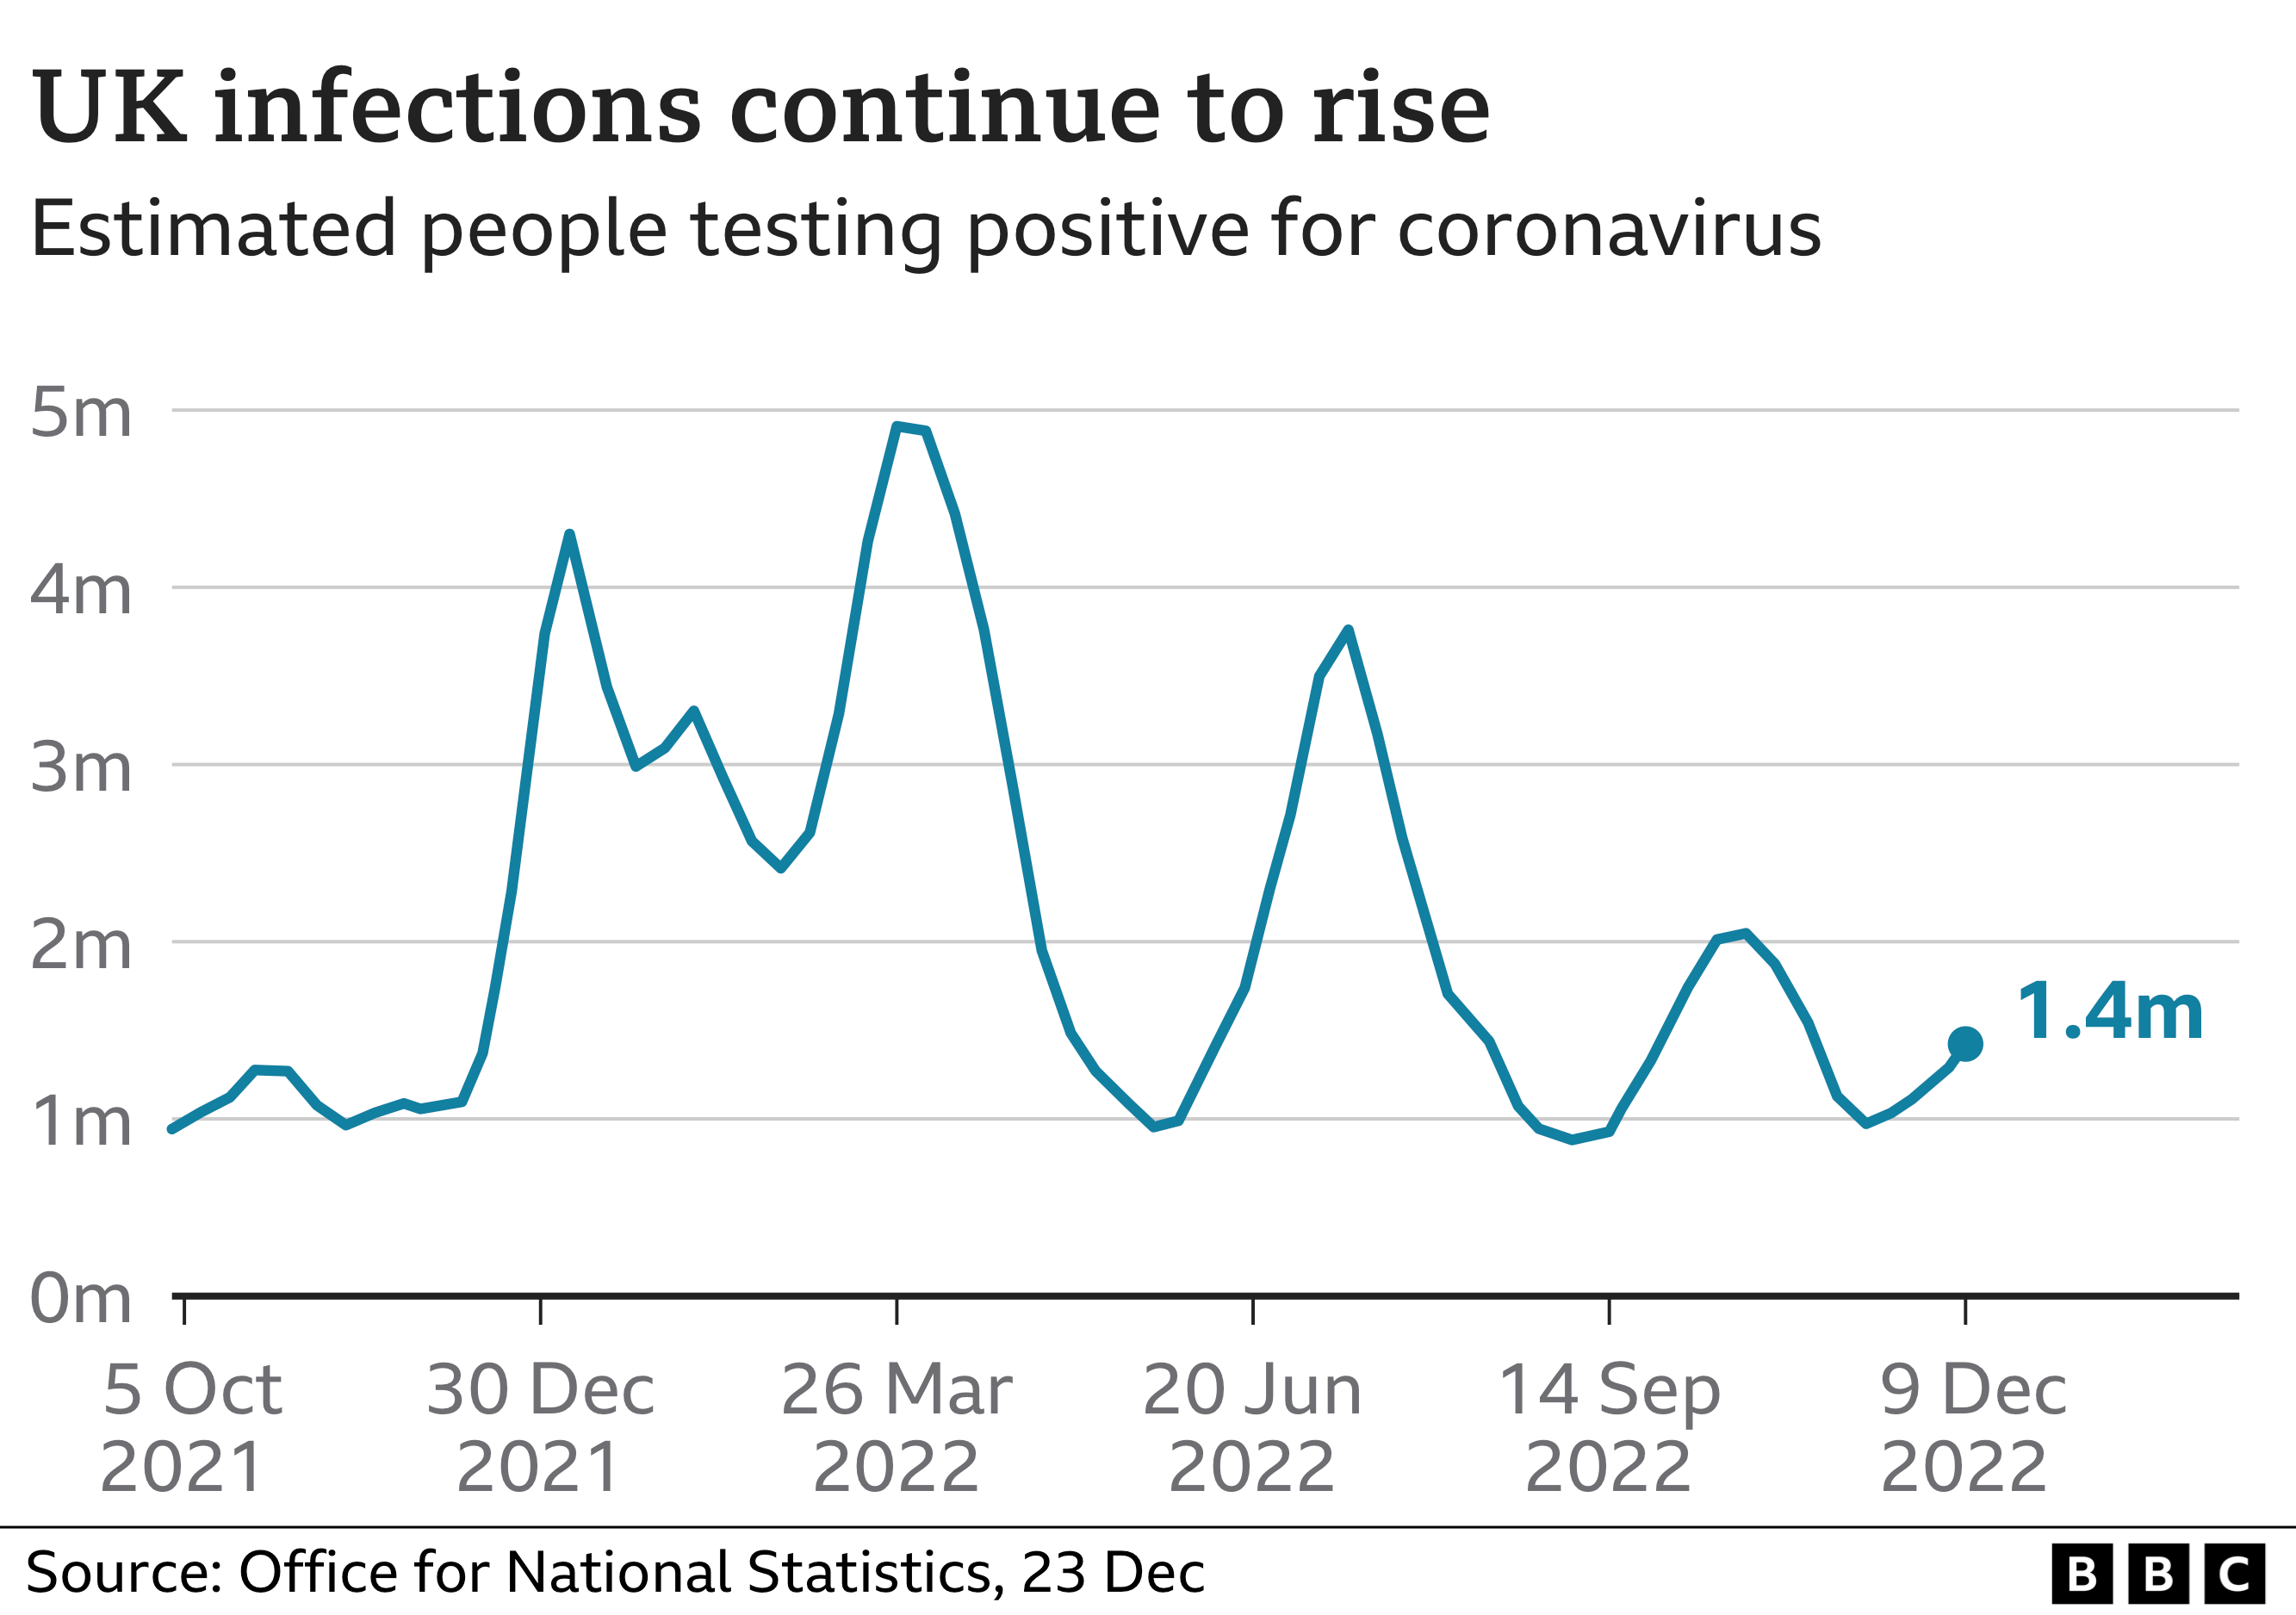 Chart showing UK infection levels continuing to rise in recent weeks, reaching up to 1.4m people. This is however lower than previous peaks such as December 2021 and March 2022 when levels peaked at 5 million people. Summer 2022 saw infection levels climb to above 3m